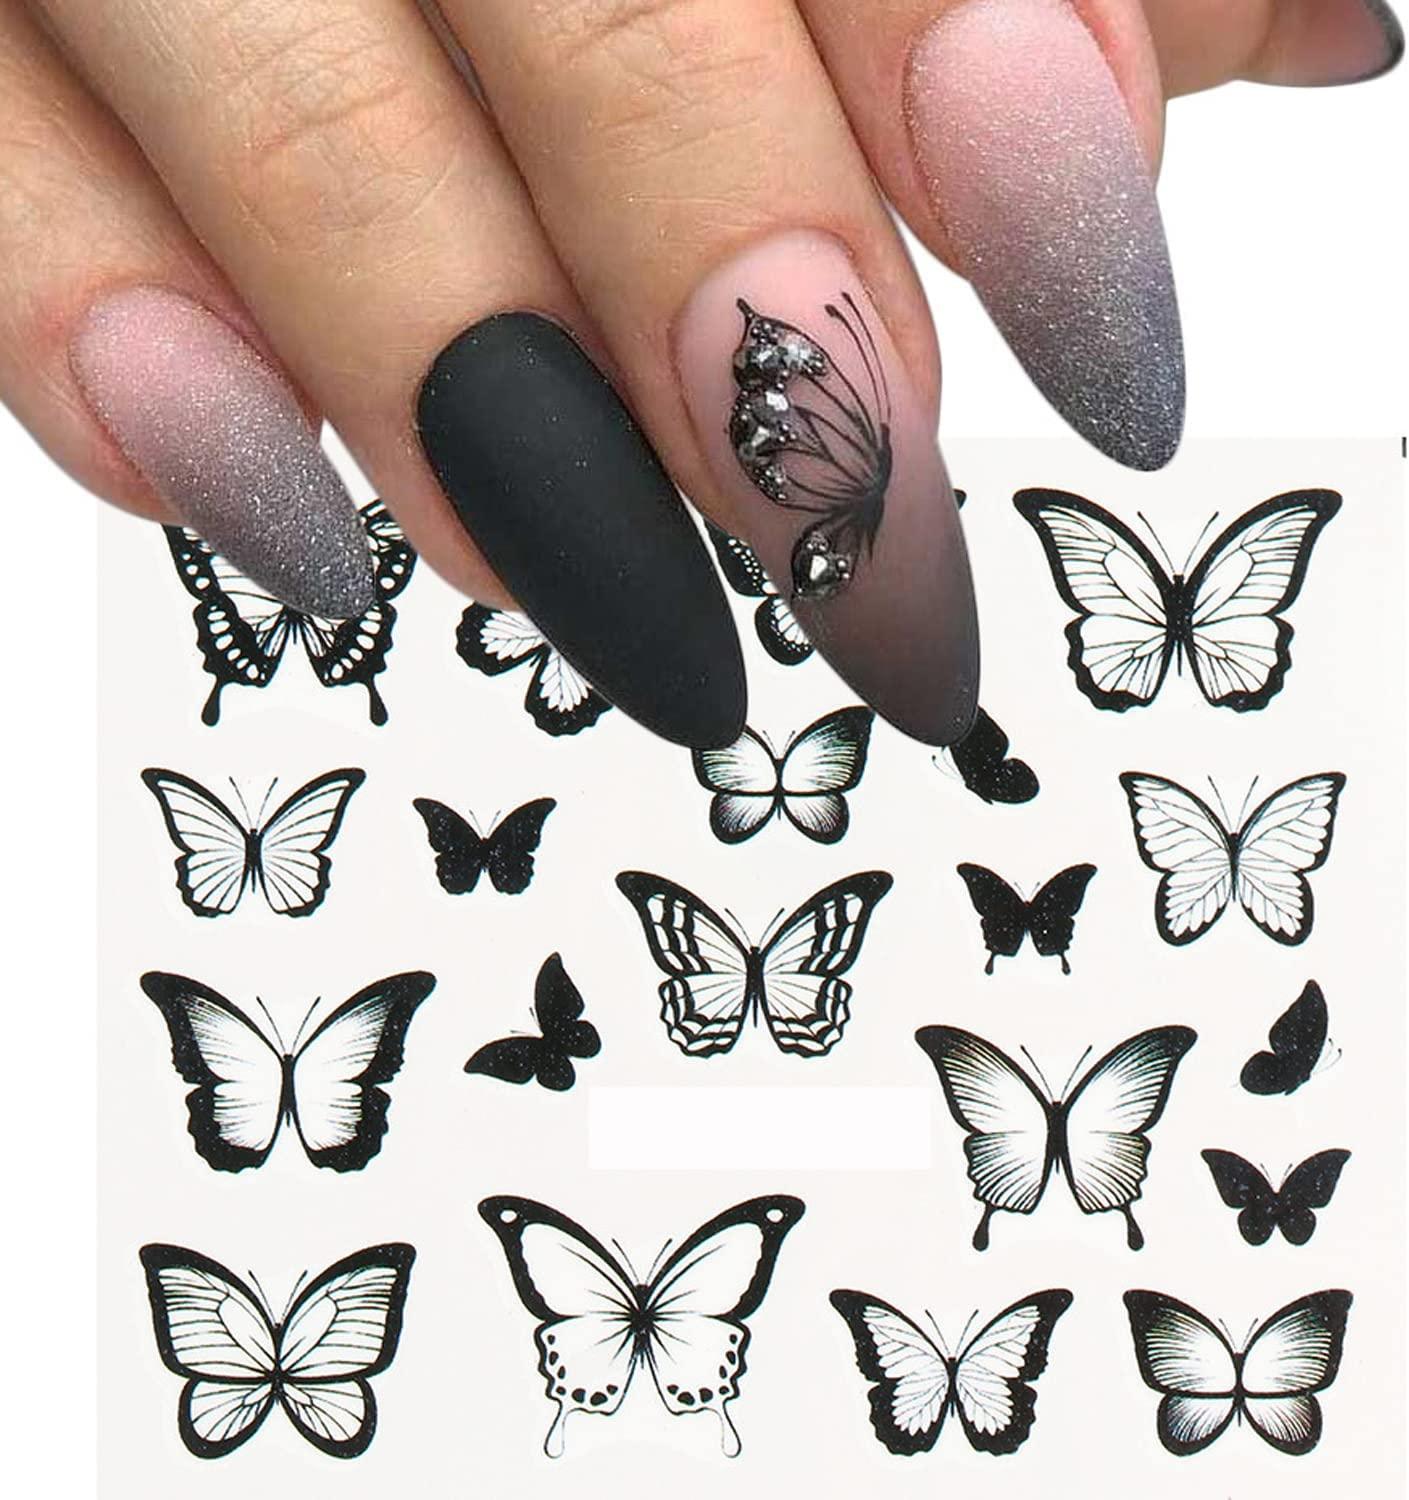 Buy Nail Art Stickers Decals Transfers Black Bohemian Face Facial Abstract  Faces Girl Woman Flowers Floral Rose Roses Fern Leaf WG254 Online in India  - Etsy